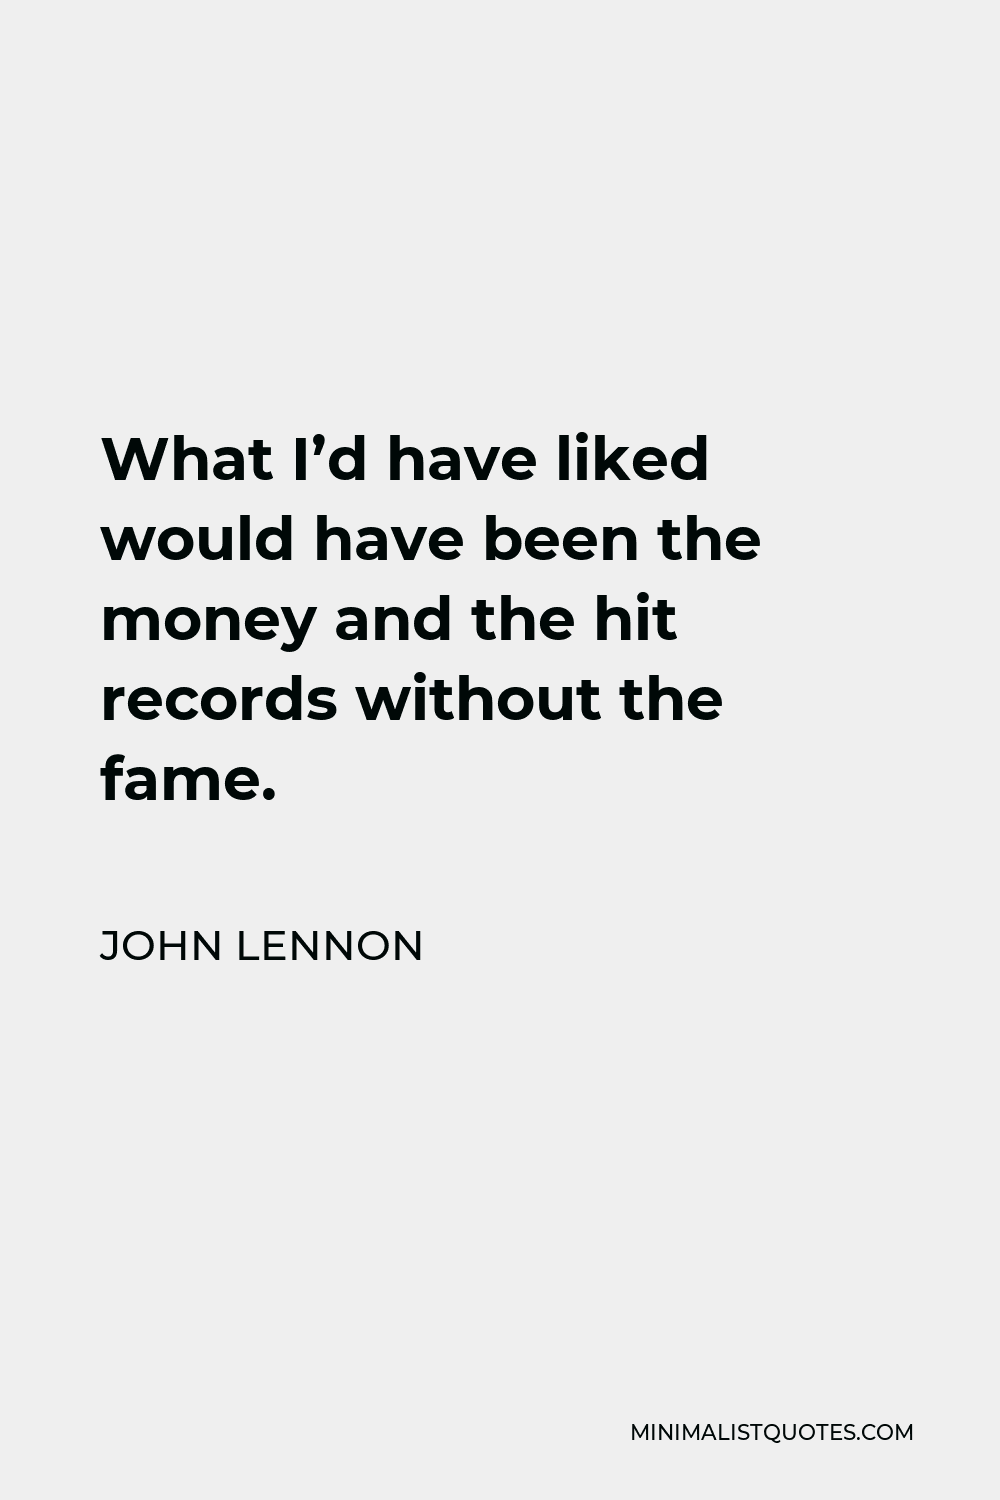 John Lennon Quote - What I’d have liked would have been the money and the hit records without the fame.